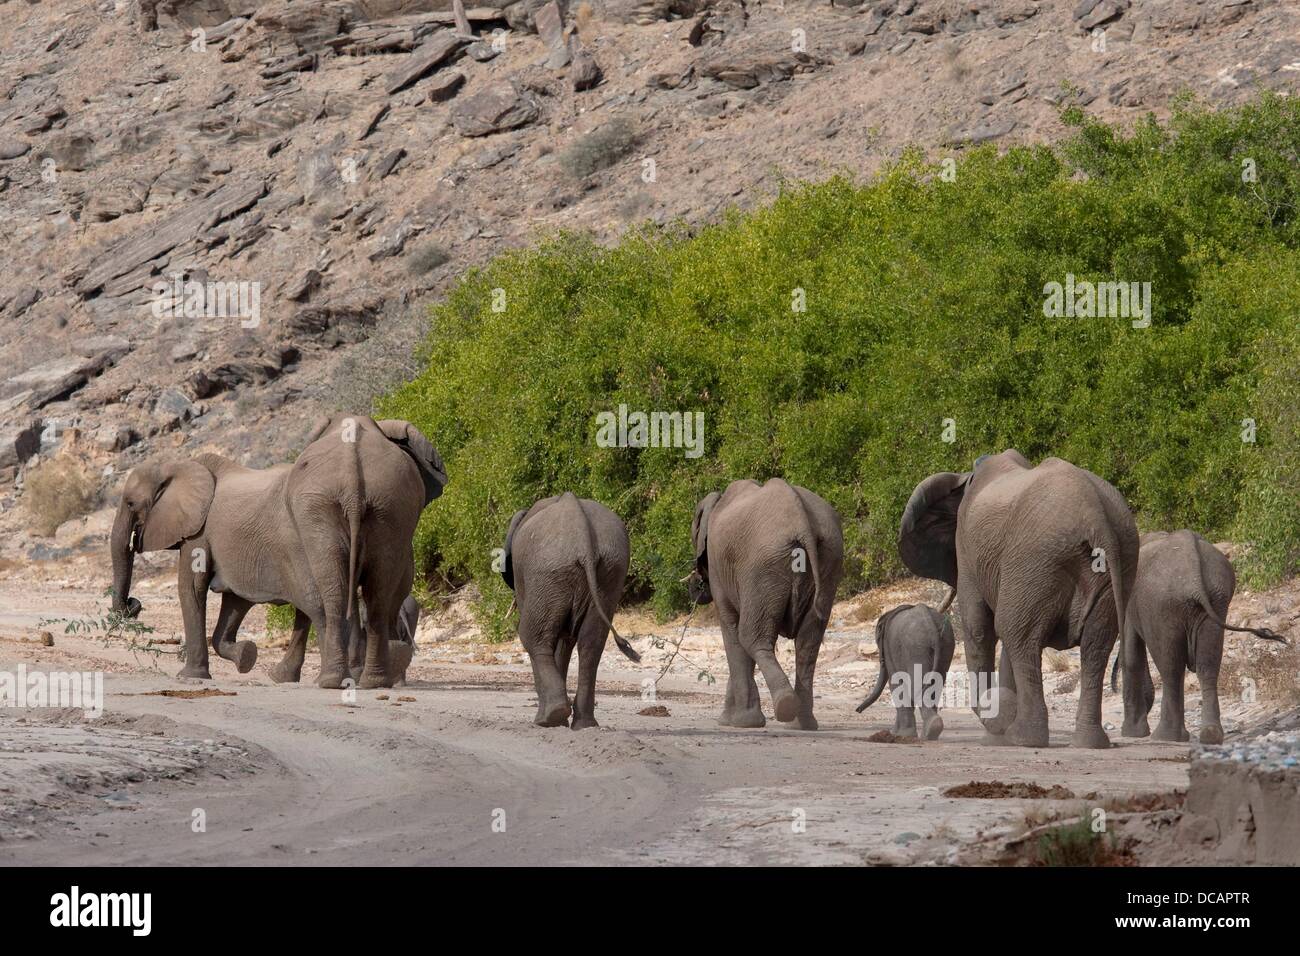 Elephants are pictured inthe dry river bed of the Hoanib River in the Kaokoveld near Sesfontein, Namibia, 12 December 2012. Photo: Tom Schulze Stock Photo